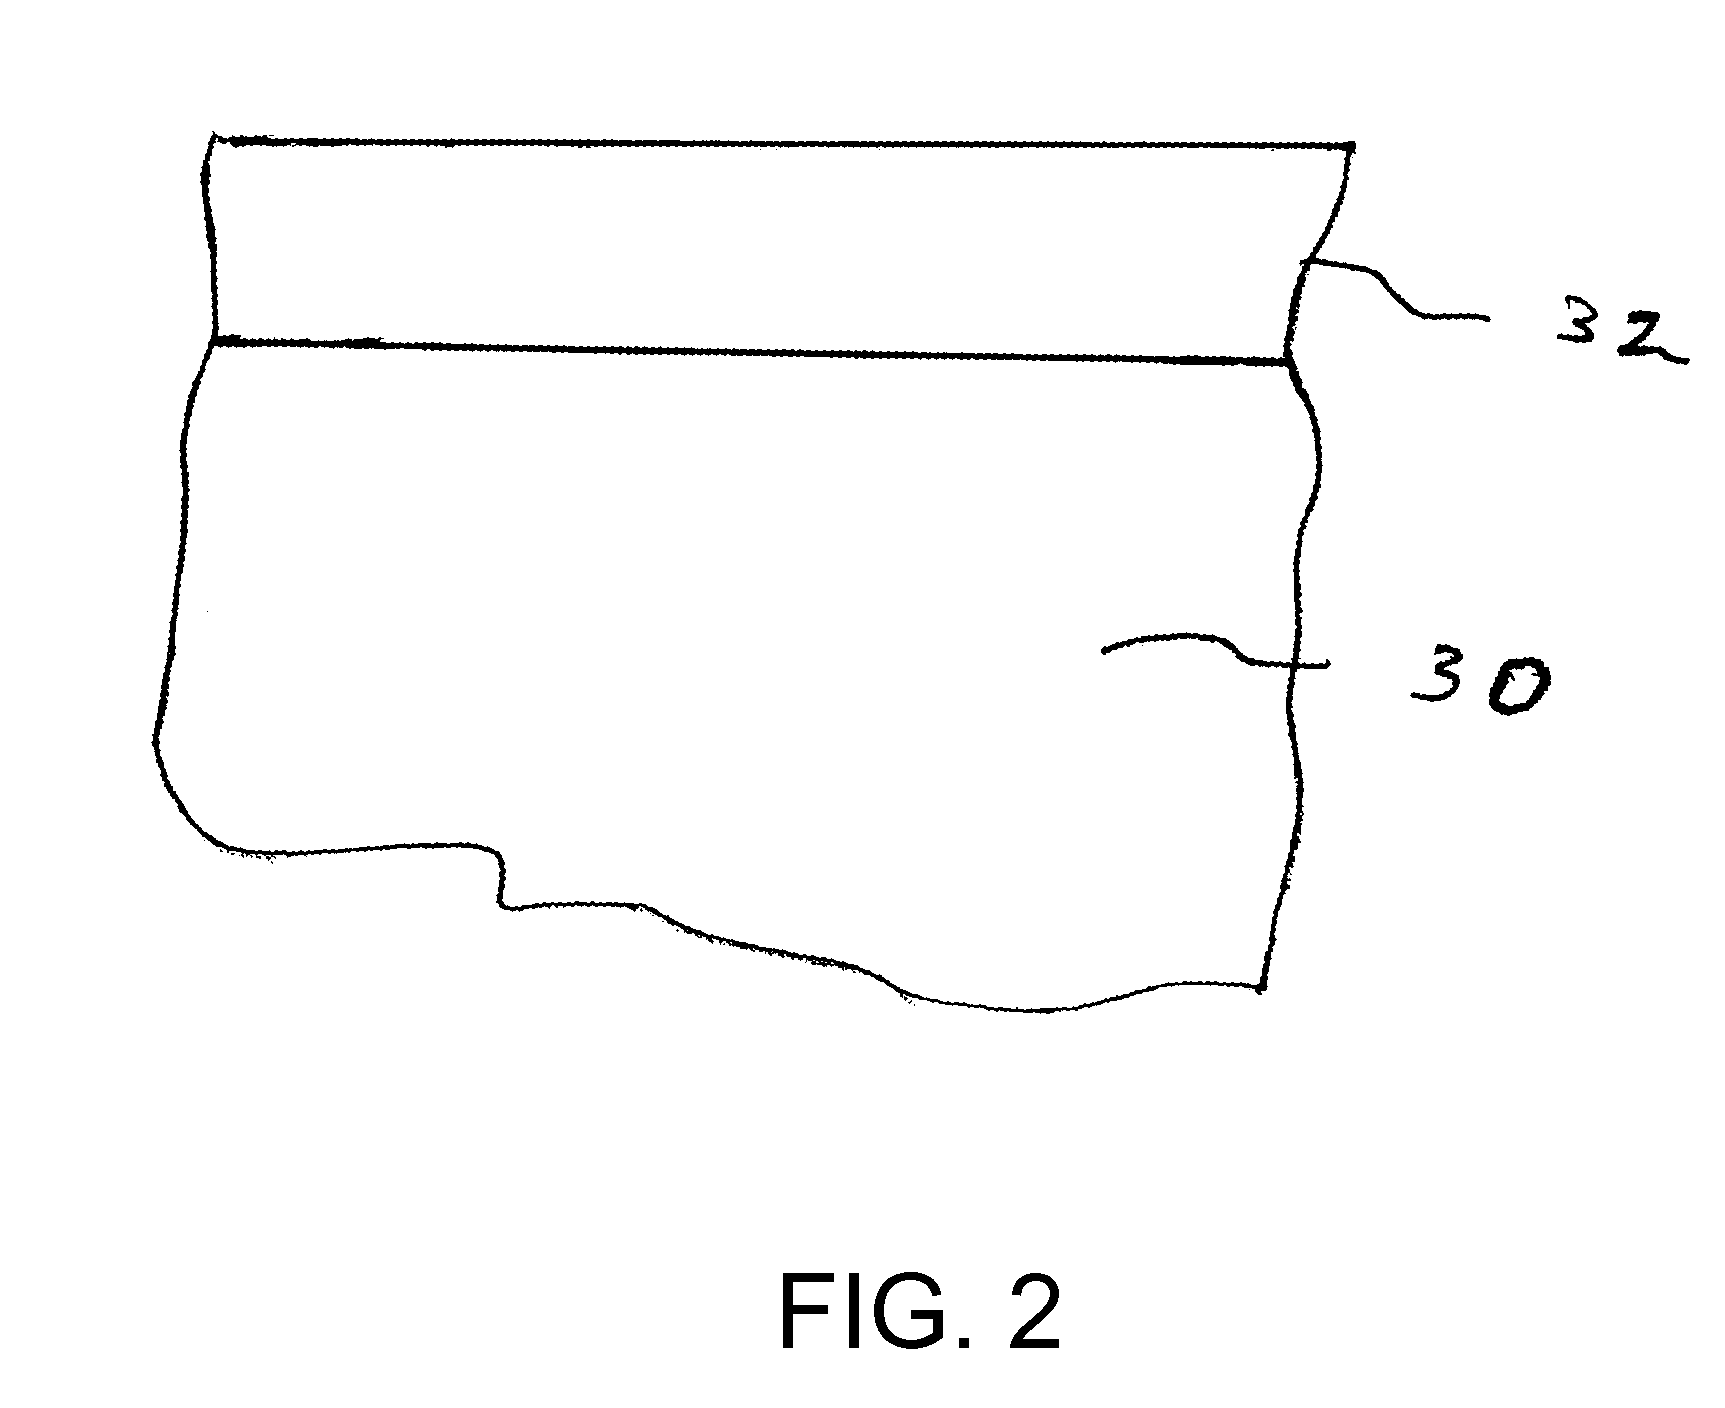 Nano-fabricated superconducting radio-frequency composites, method for producing nano-fabricated superconducting RF composites